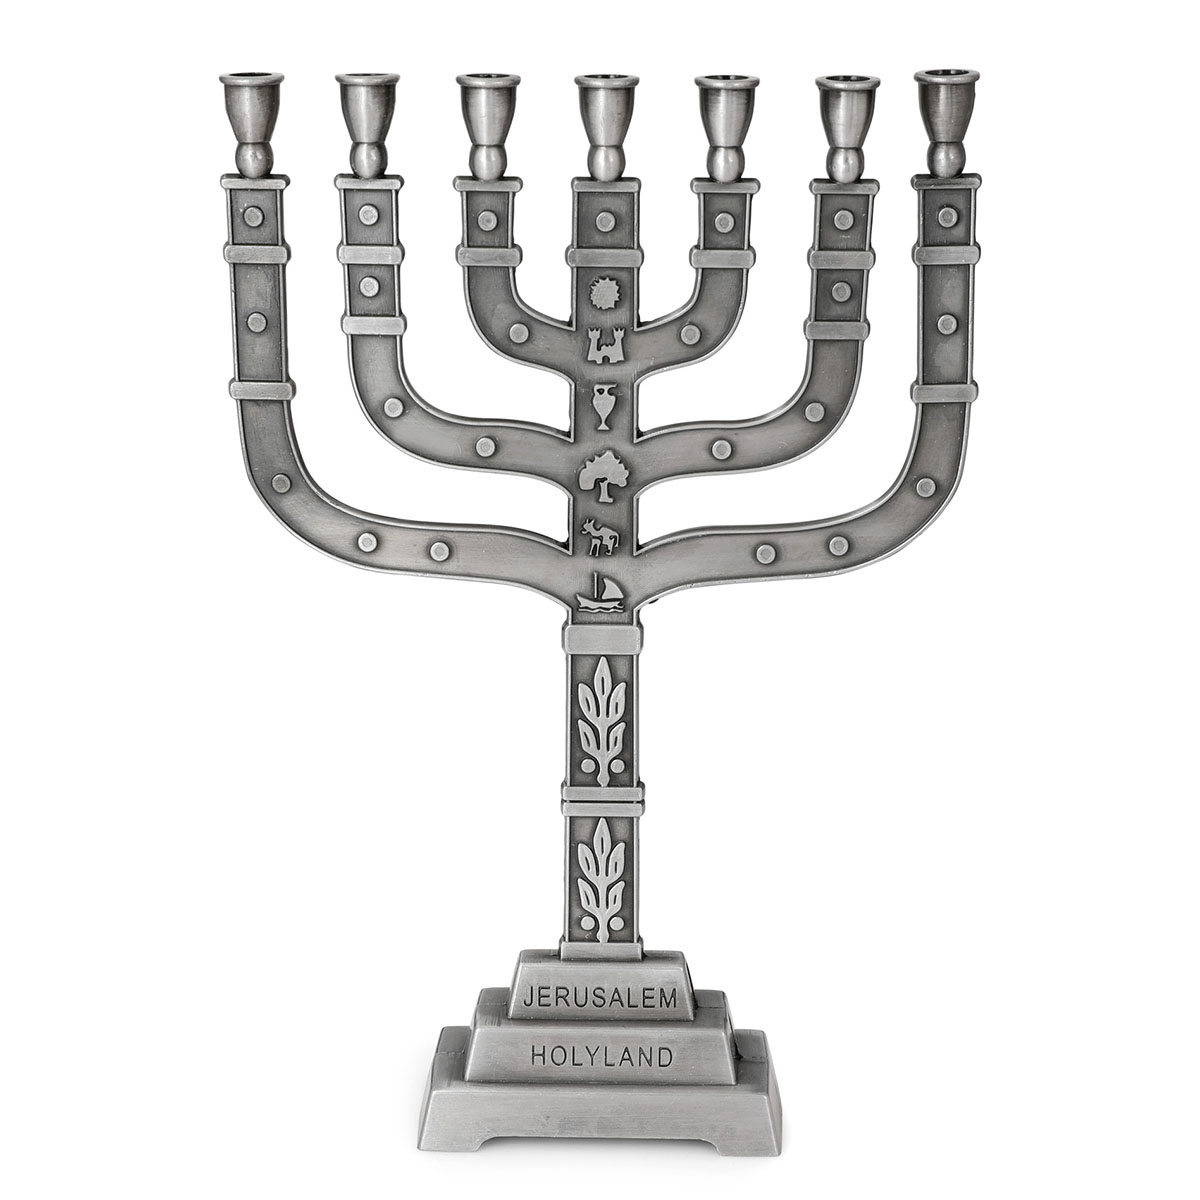 Knesset 7-Branched 12 Tribes Jerusalem Menorah (Choice of Colors) - 1